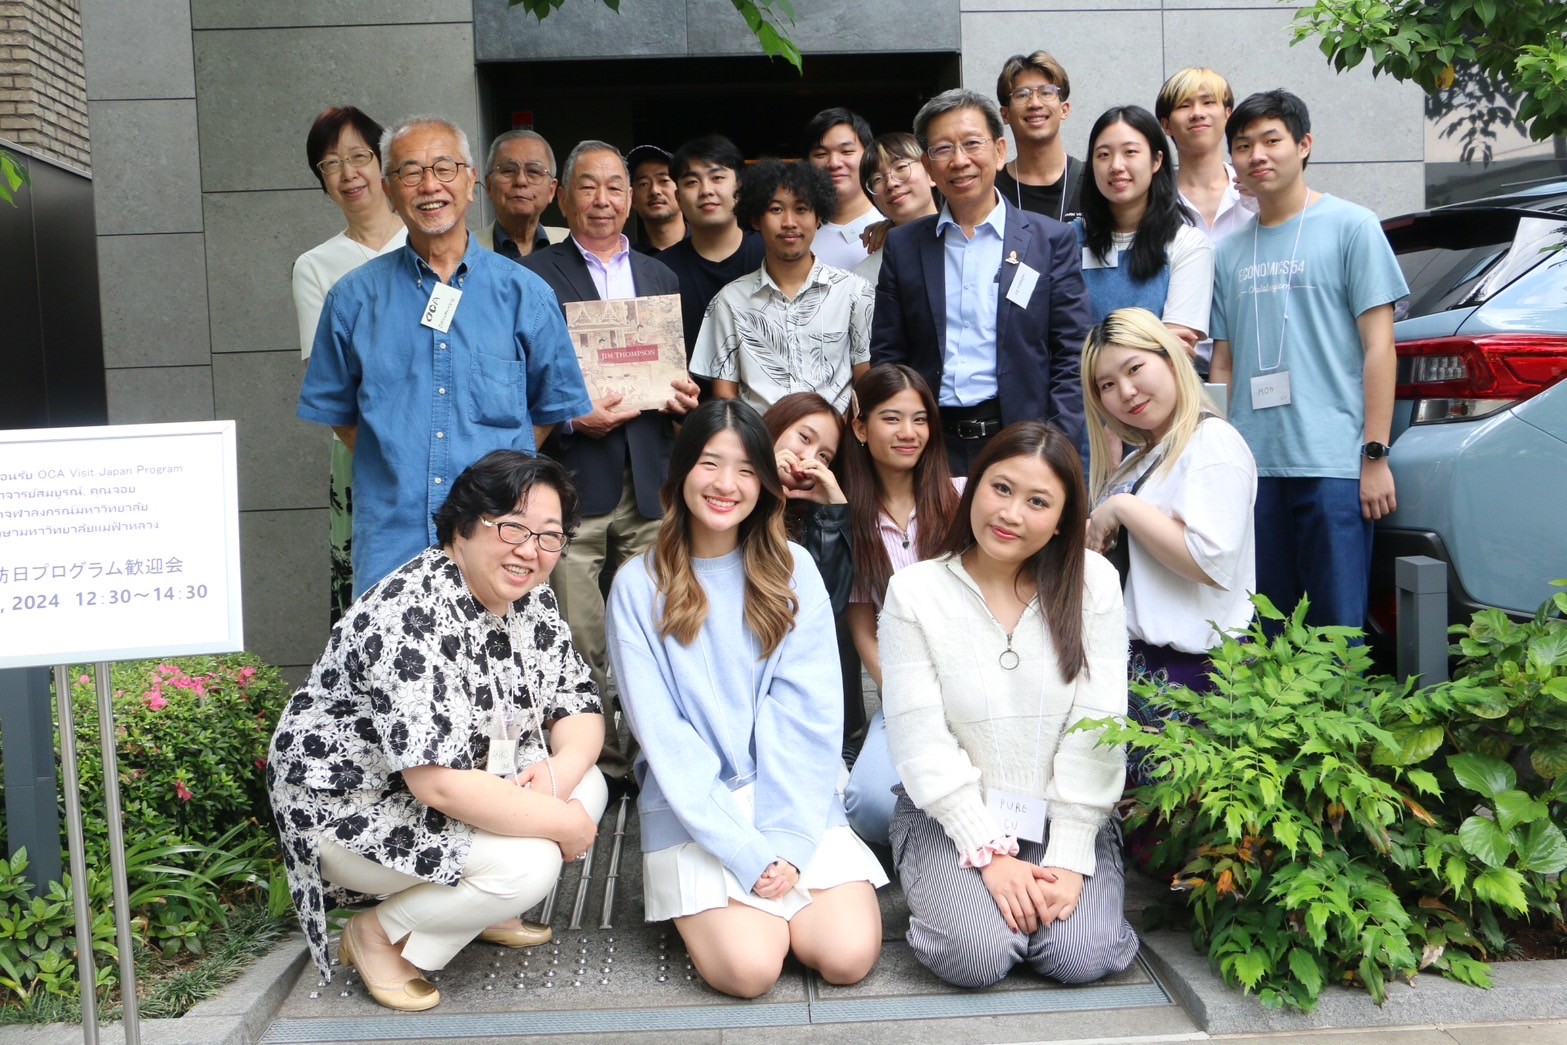 MFU Students Join the OCA Summer Programme in Japan